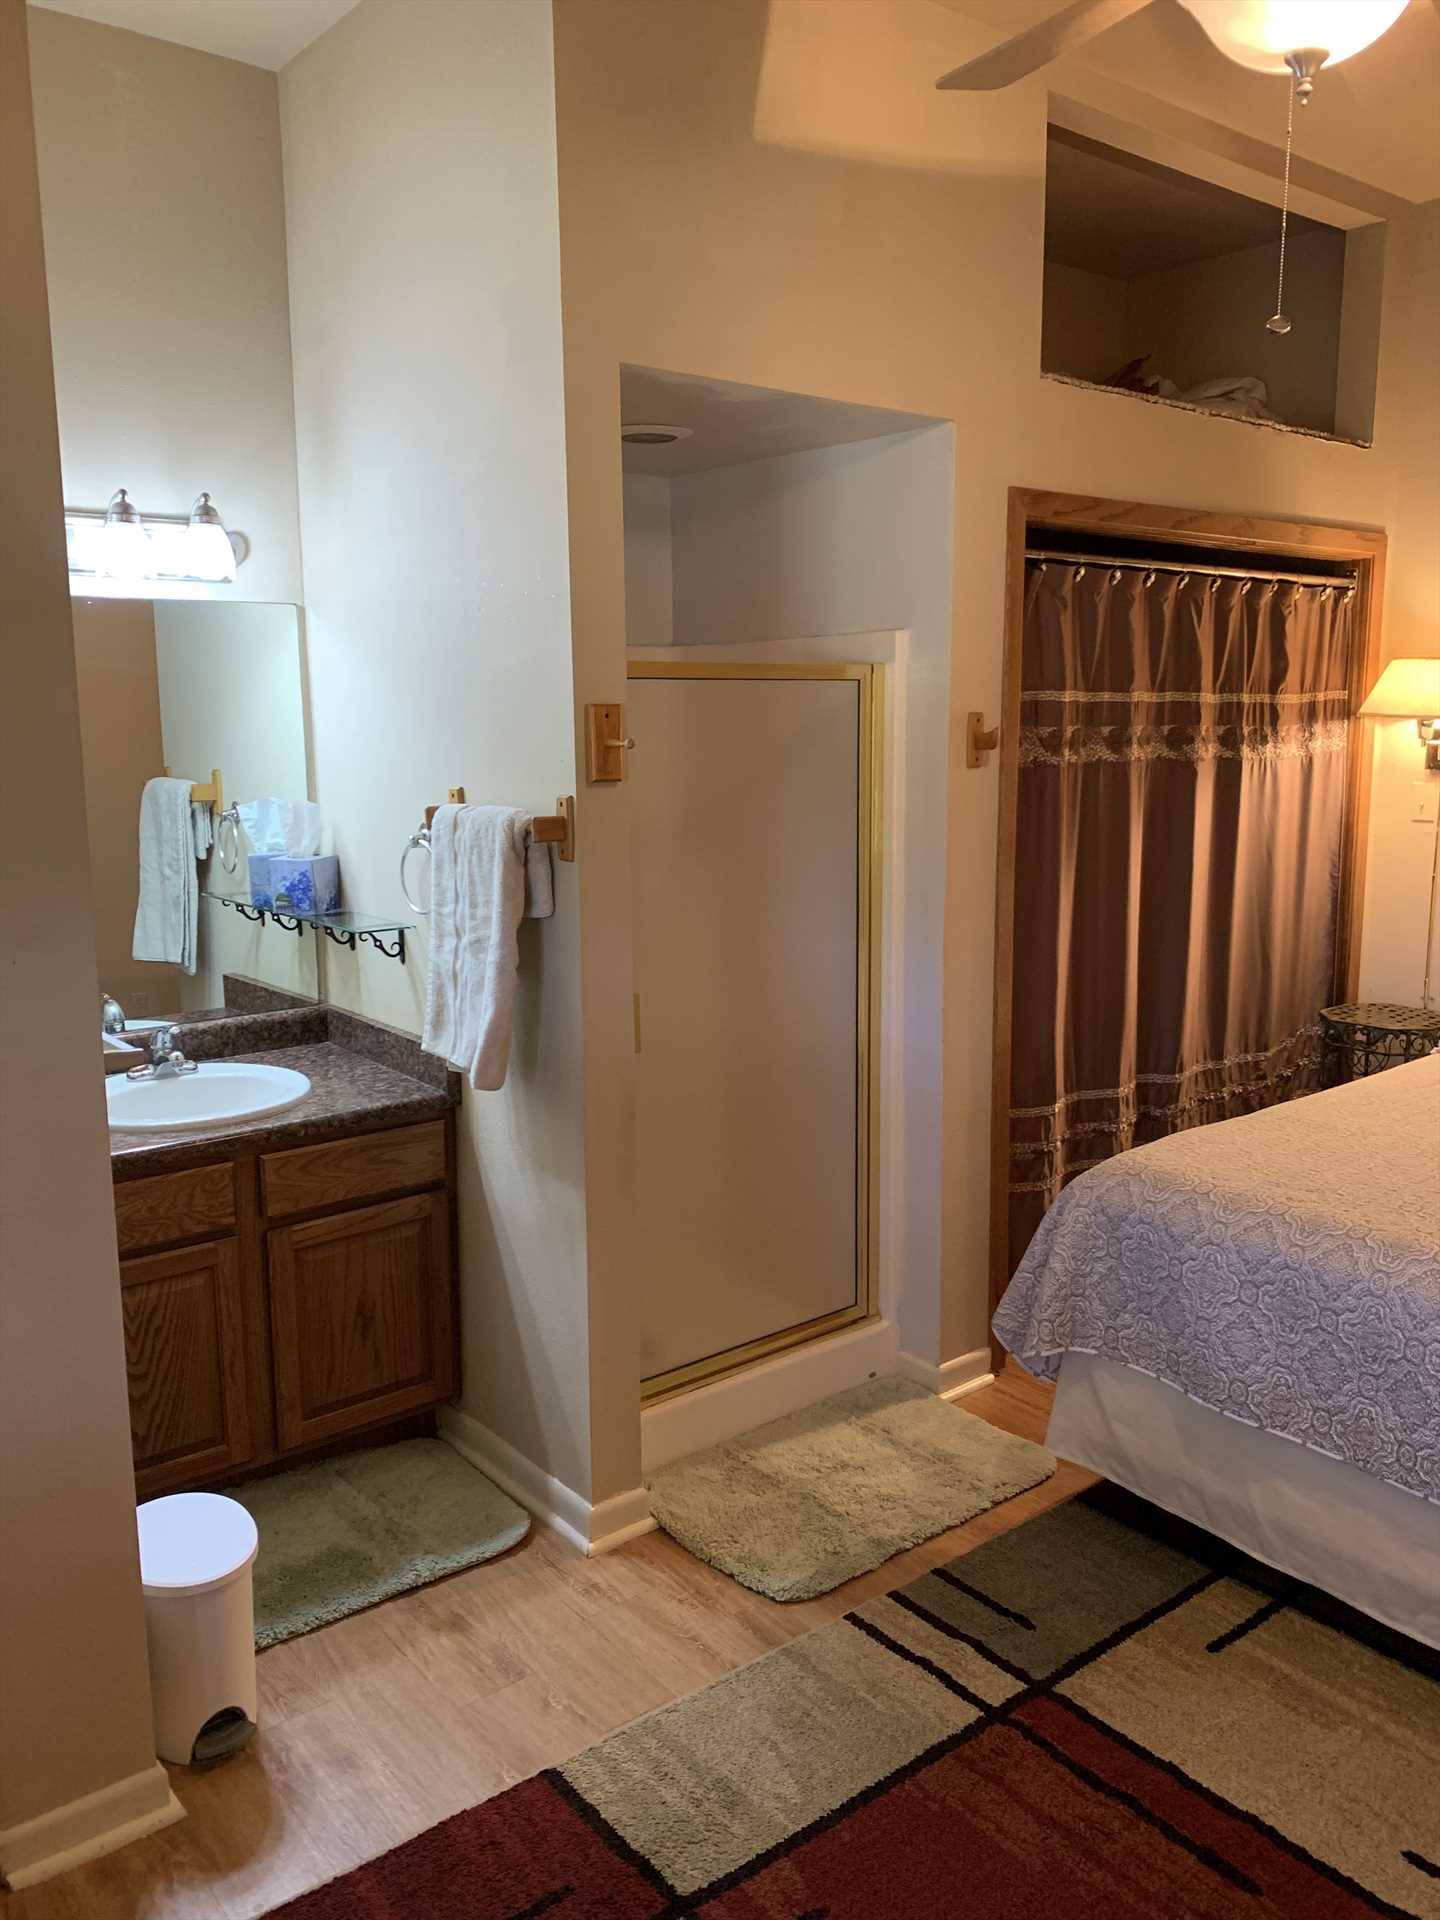                                                 Cleanup's a breeze in the shower and mirrored vanity-and all bed and bath linens are provided for your stay.